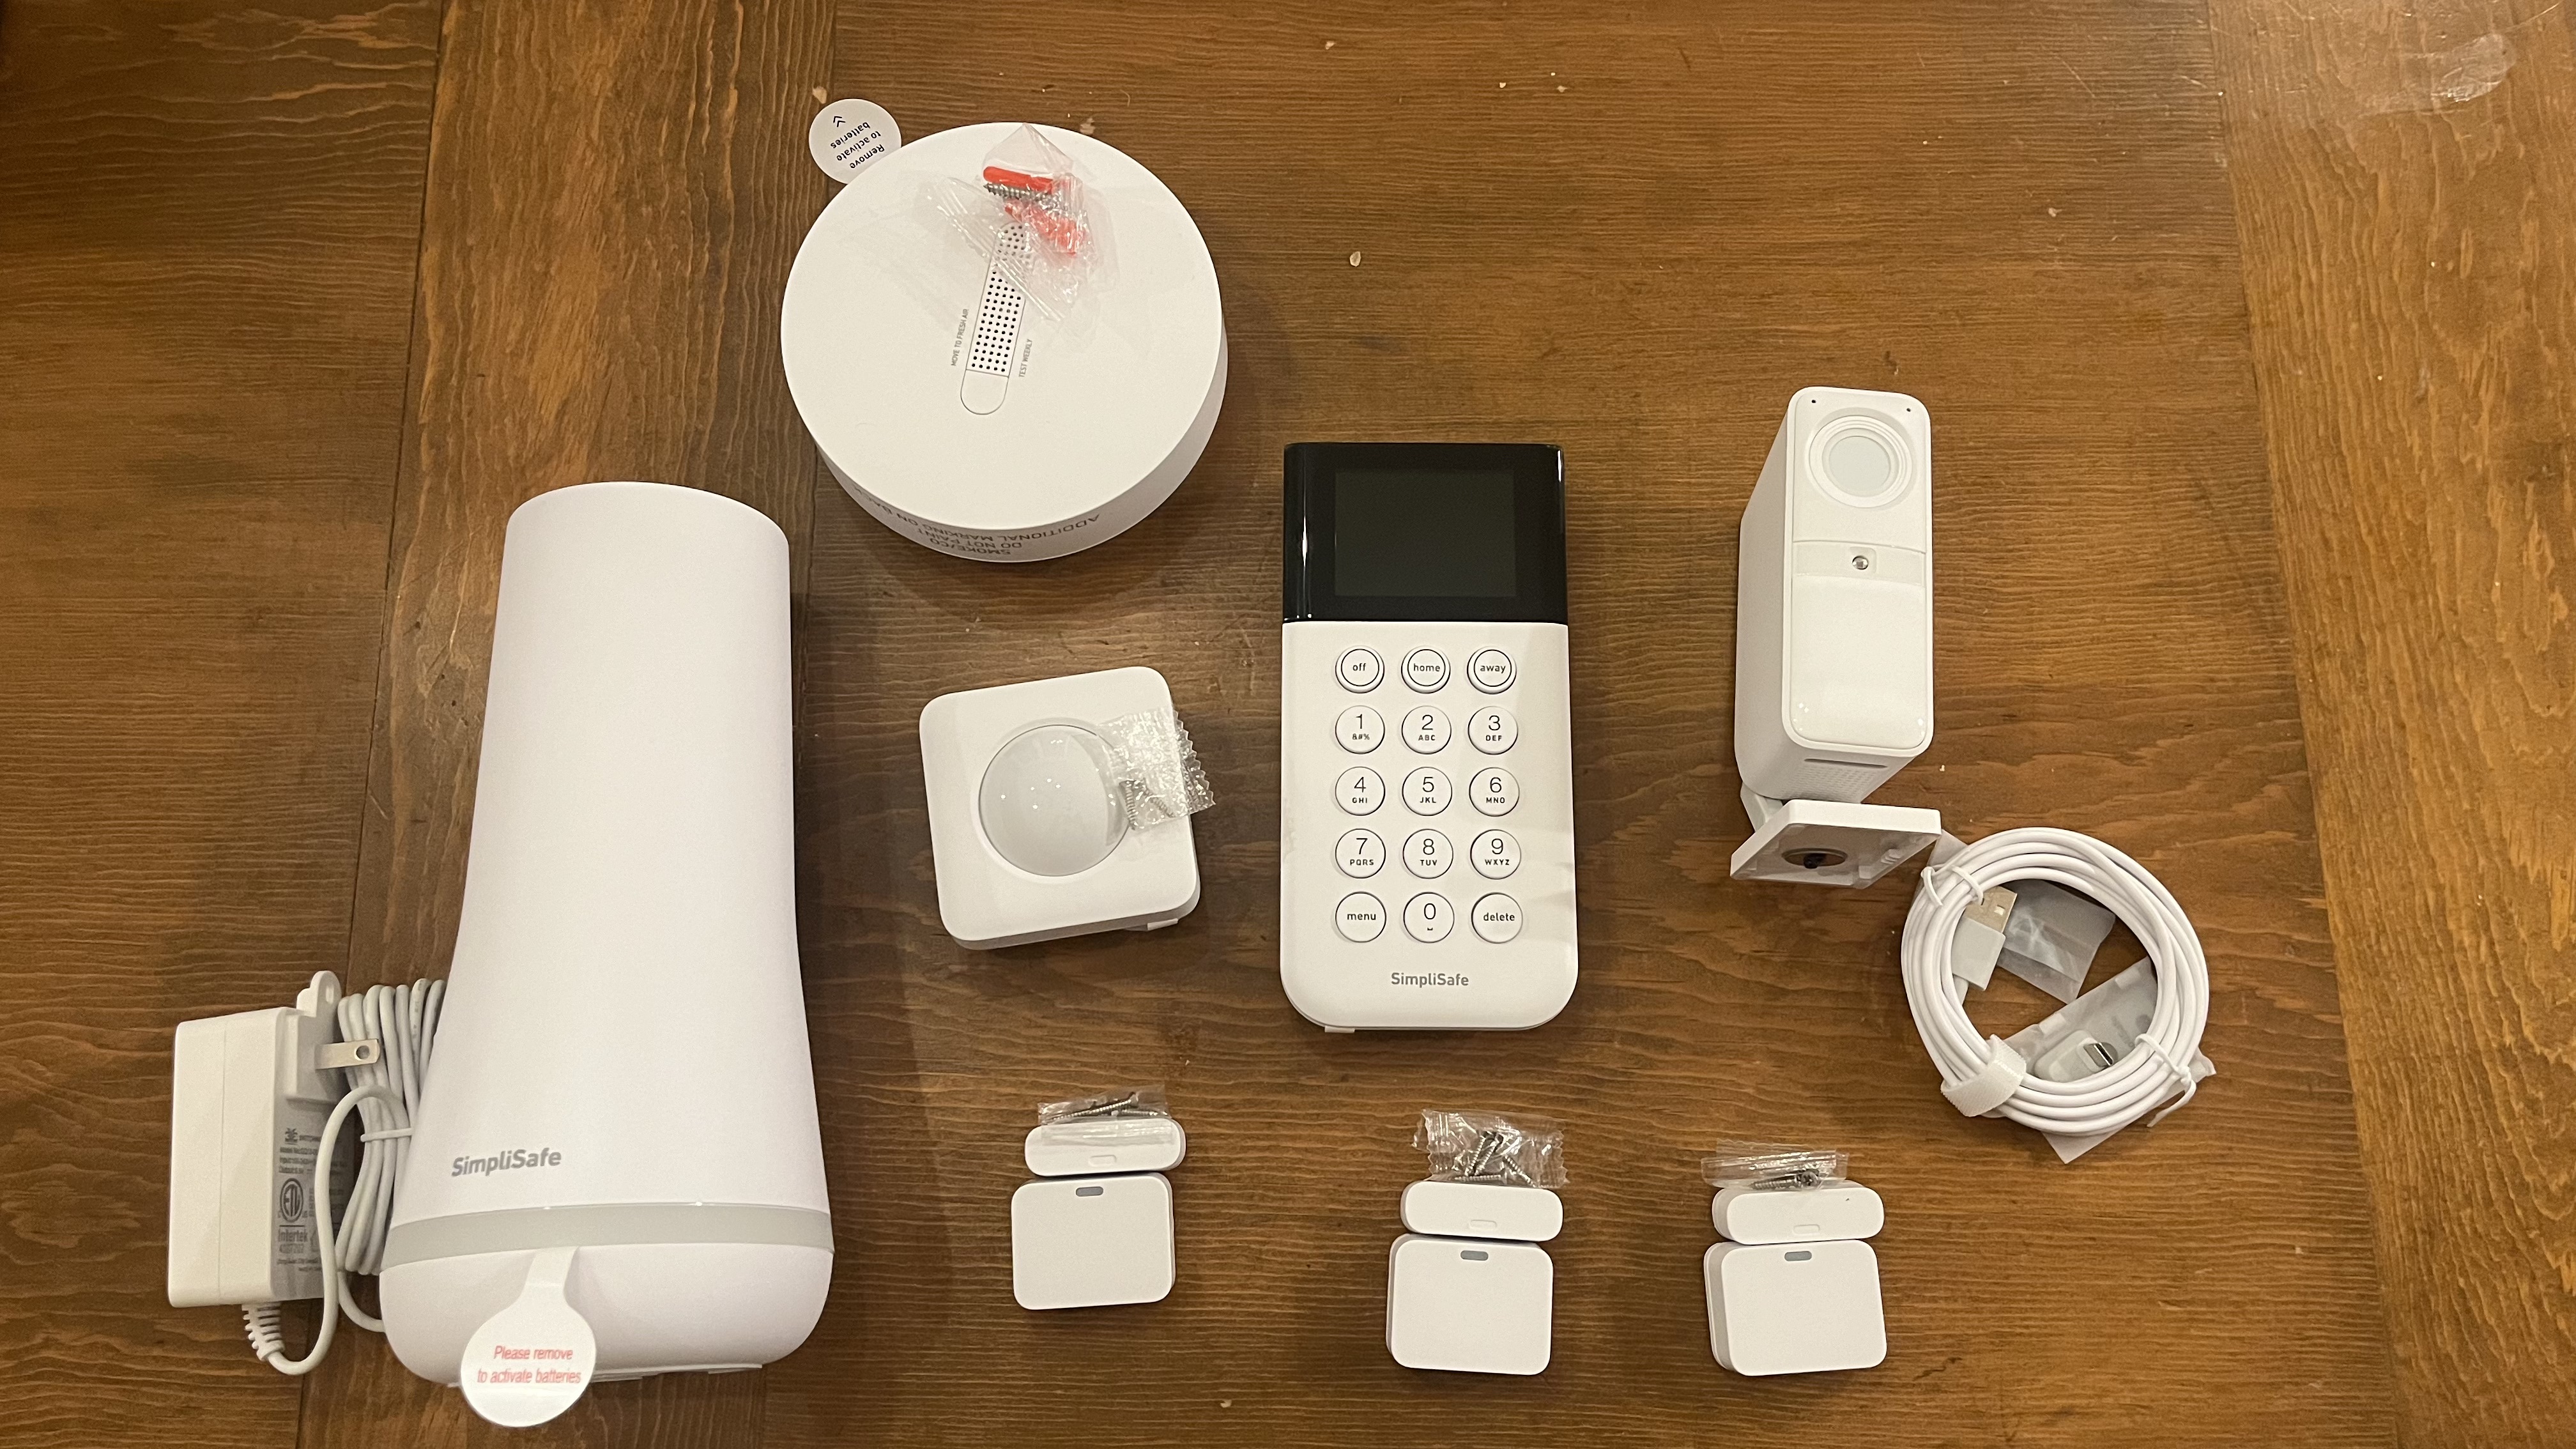 Simplisafe Security Systems included items